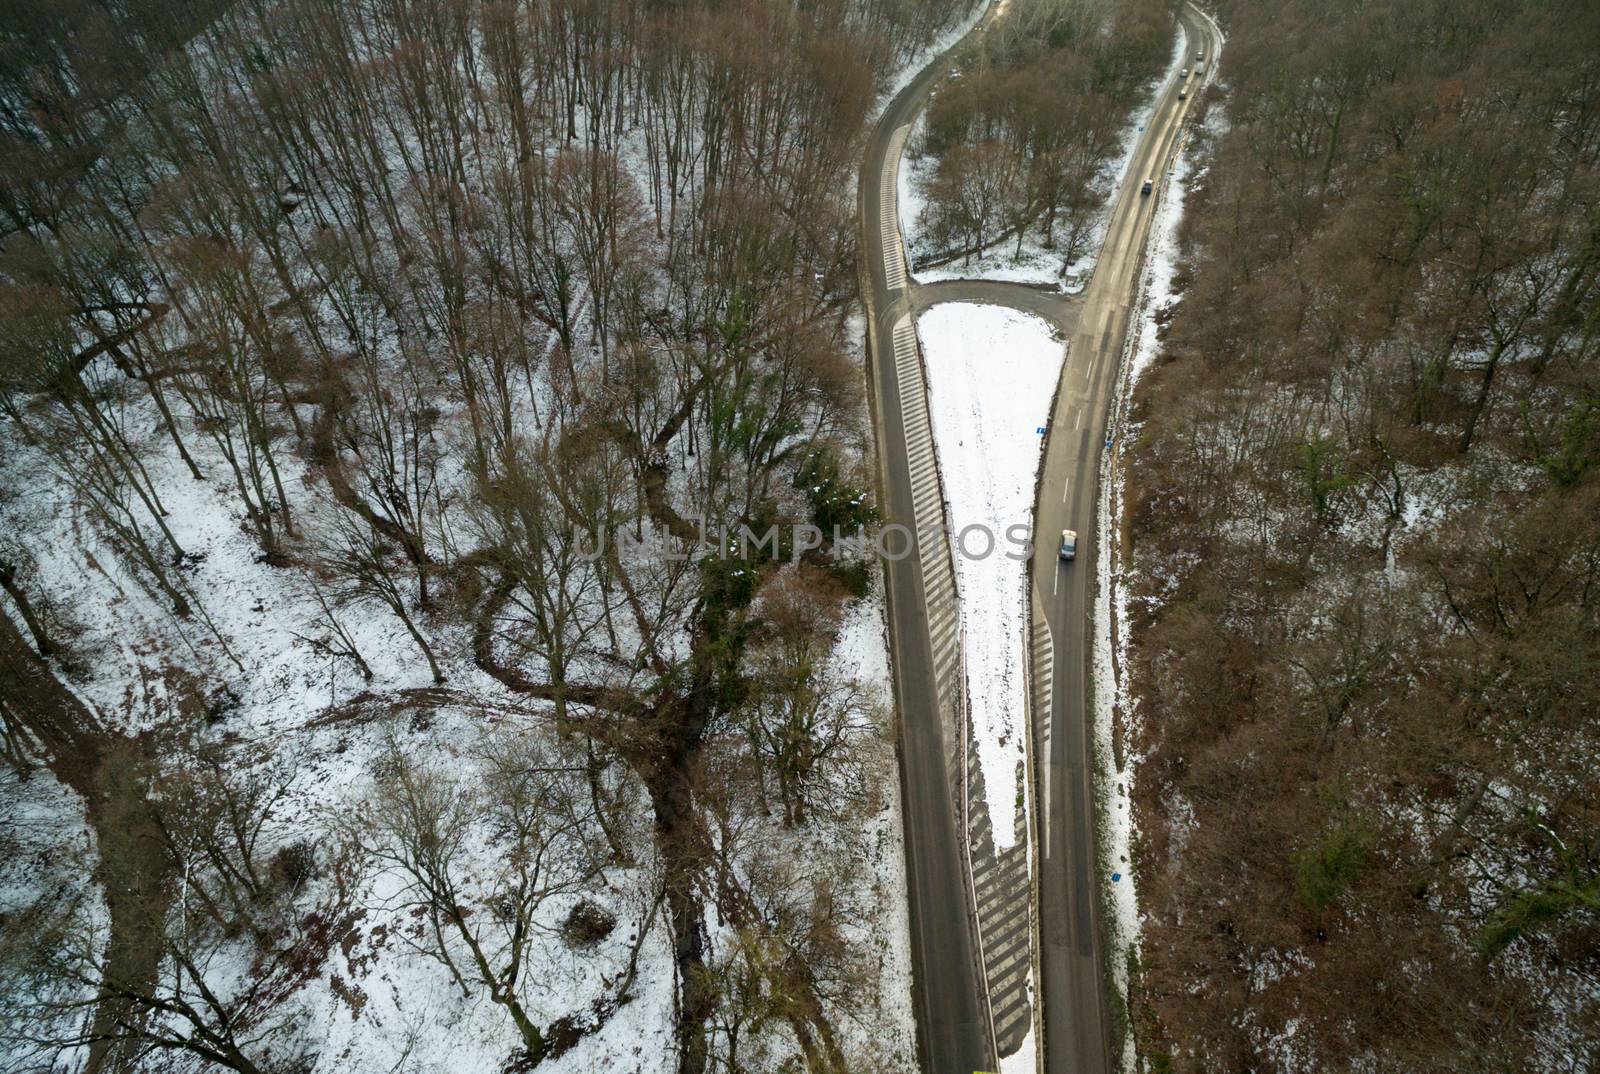 Winter Mountain Road From Above by MilanMarkovic78